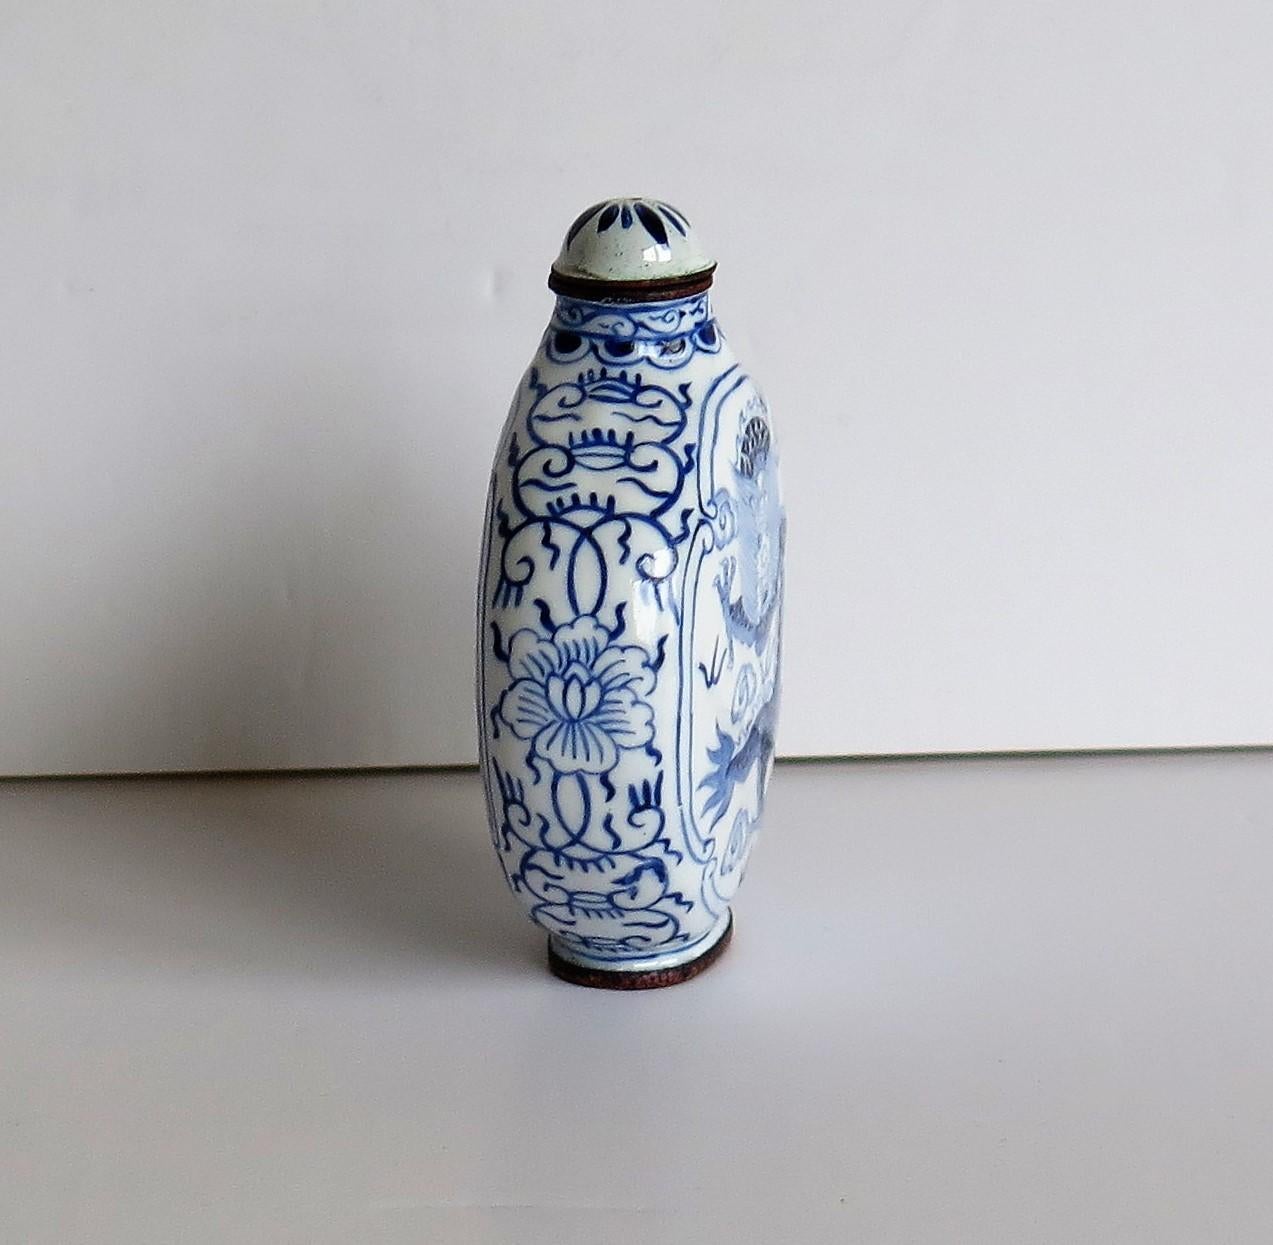 This is a Chinese enamelled snuff bottle, with a hand painted blue and white dragon on either side and a four character mark to the base, which we date to the 1940s.

The circular body of this bottle is made of copper or bronze. There is a hand